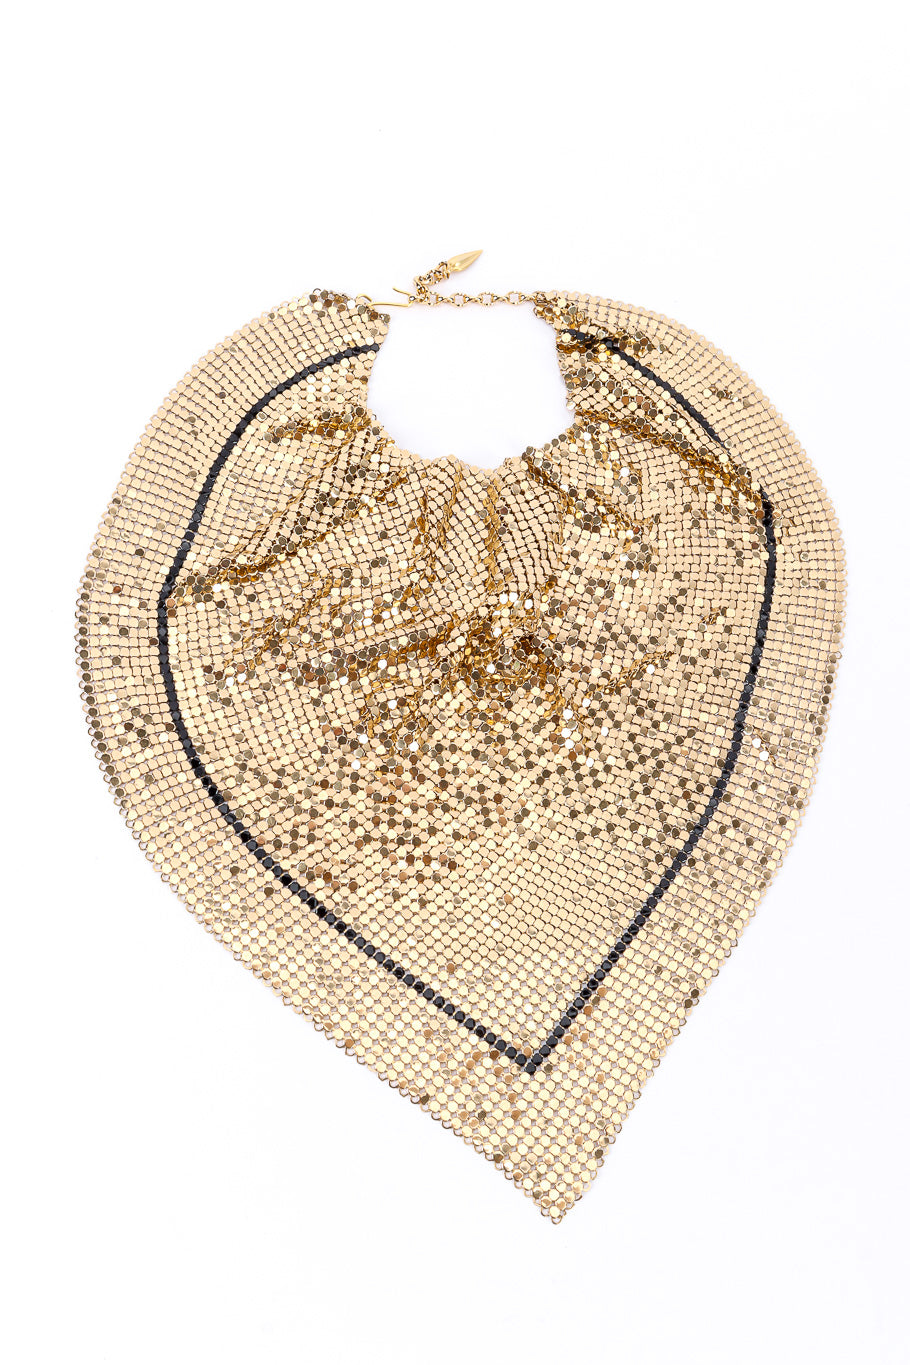 Chain mesh necklace by Whiting & Davis on white background clasped @recessla